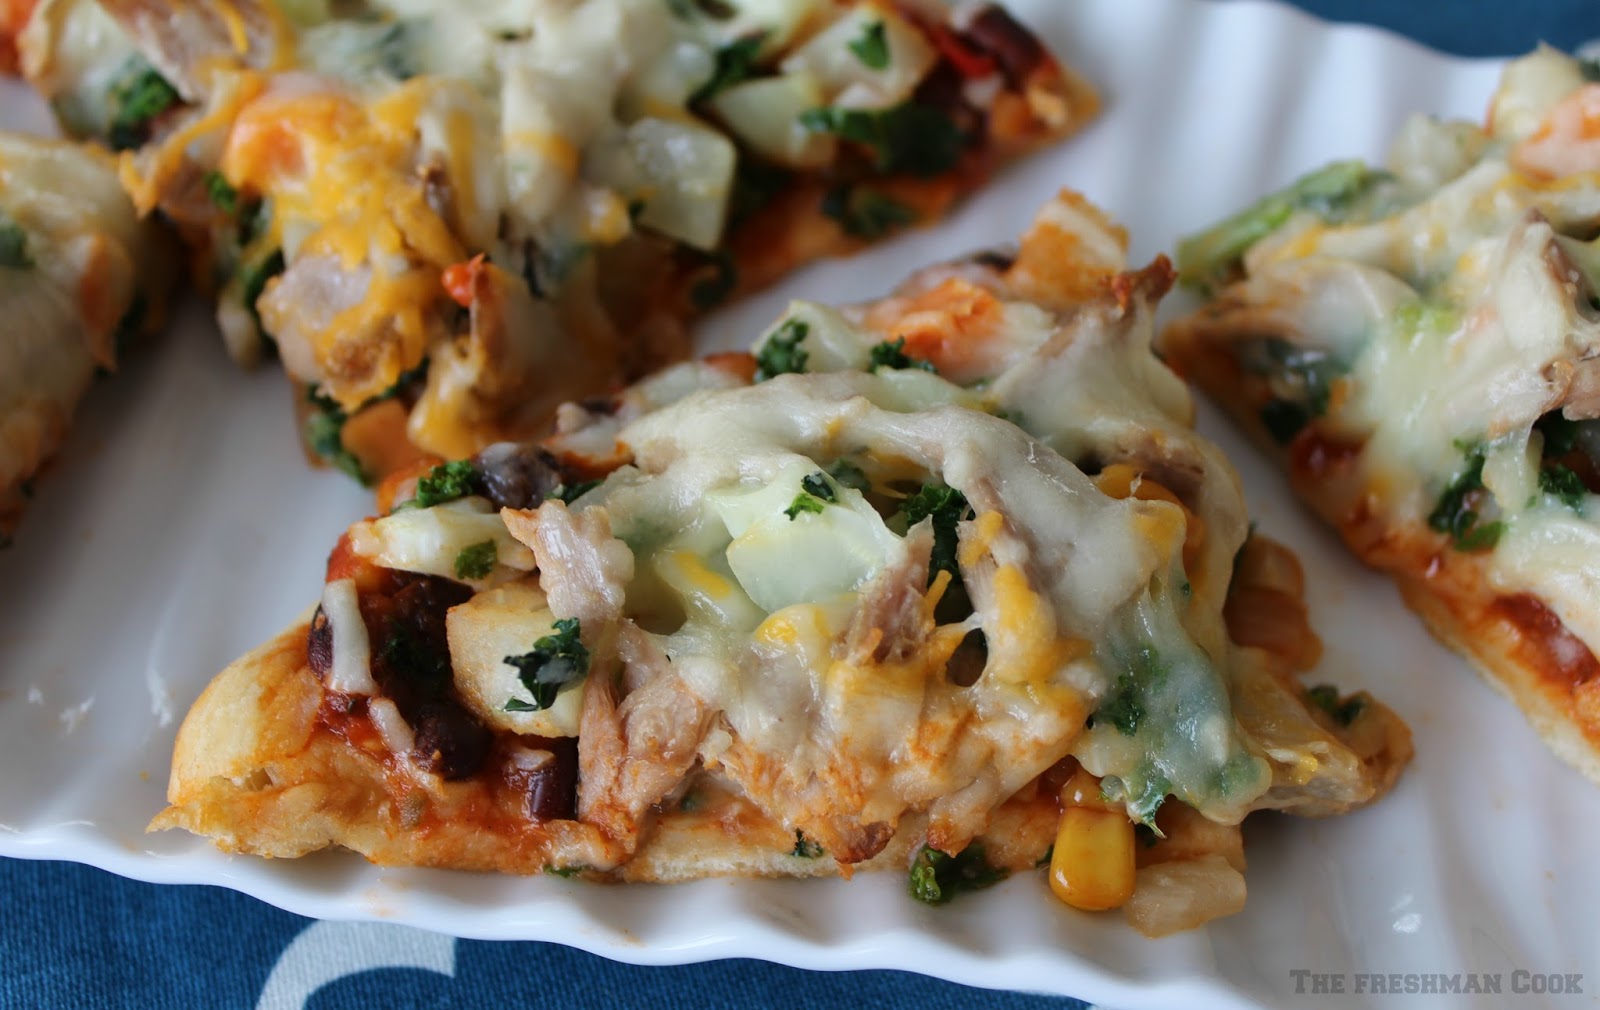 Southwest chipotle pulled pork naan bread pizza